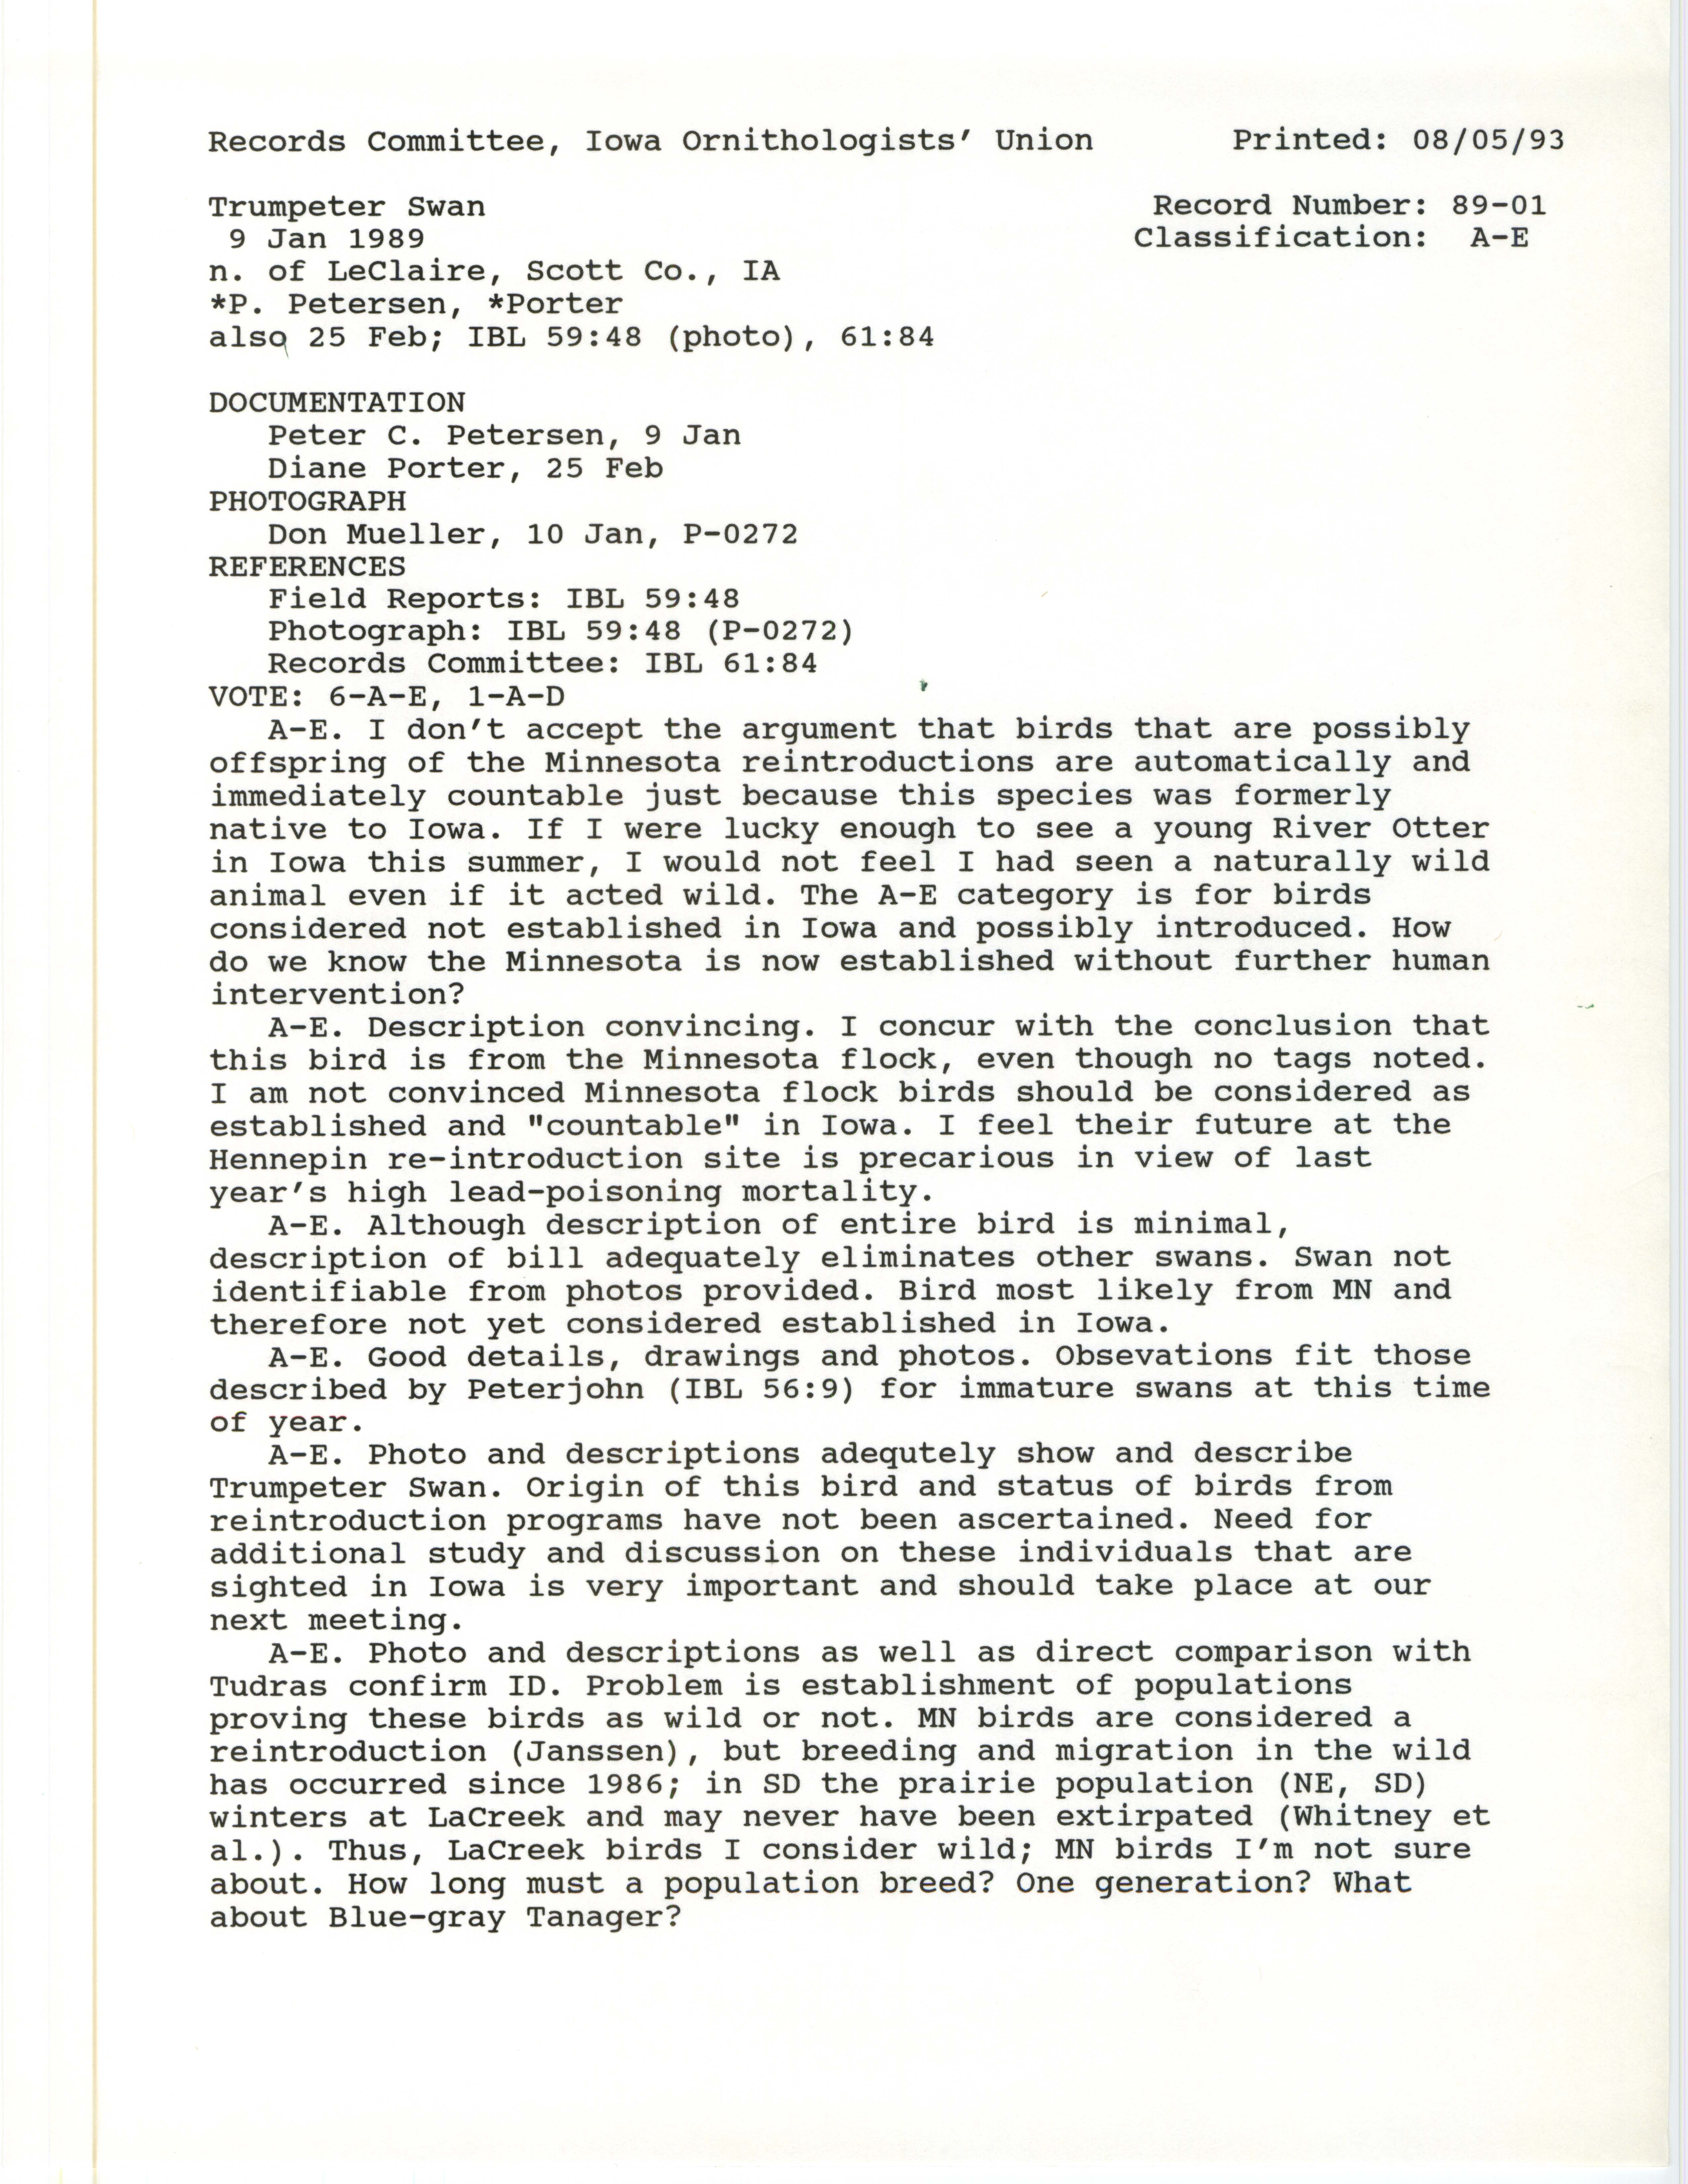 Records Committee review for rare bird sighting of a Trumpeter Swan at Le Claire, 1989